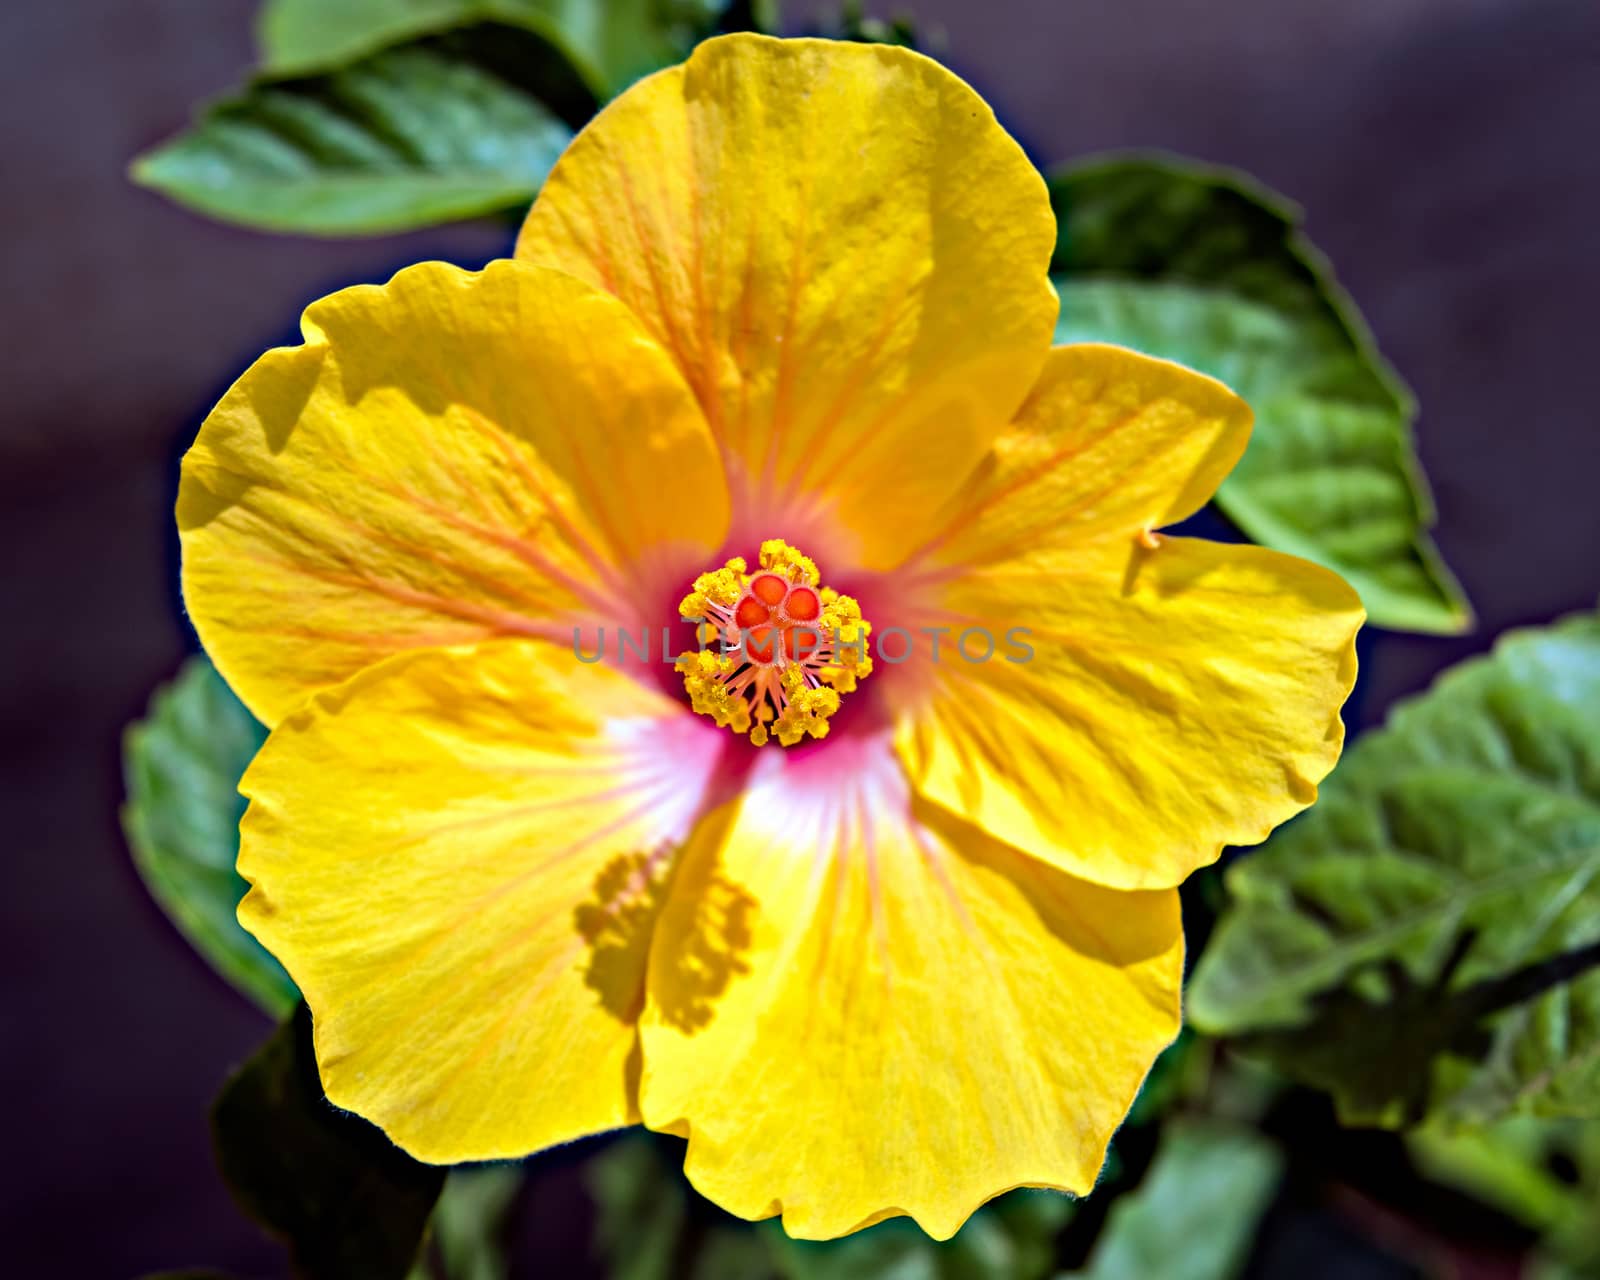 Isolated, Close-up image of Pollen grains on Stigma of a yellow Hibiscus flower. by lalam